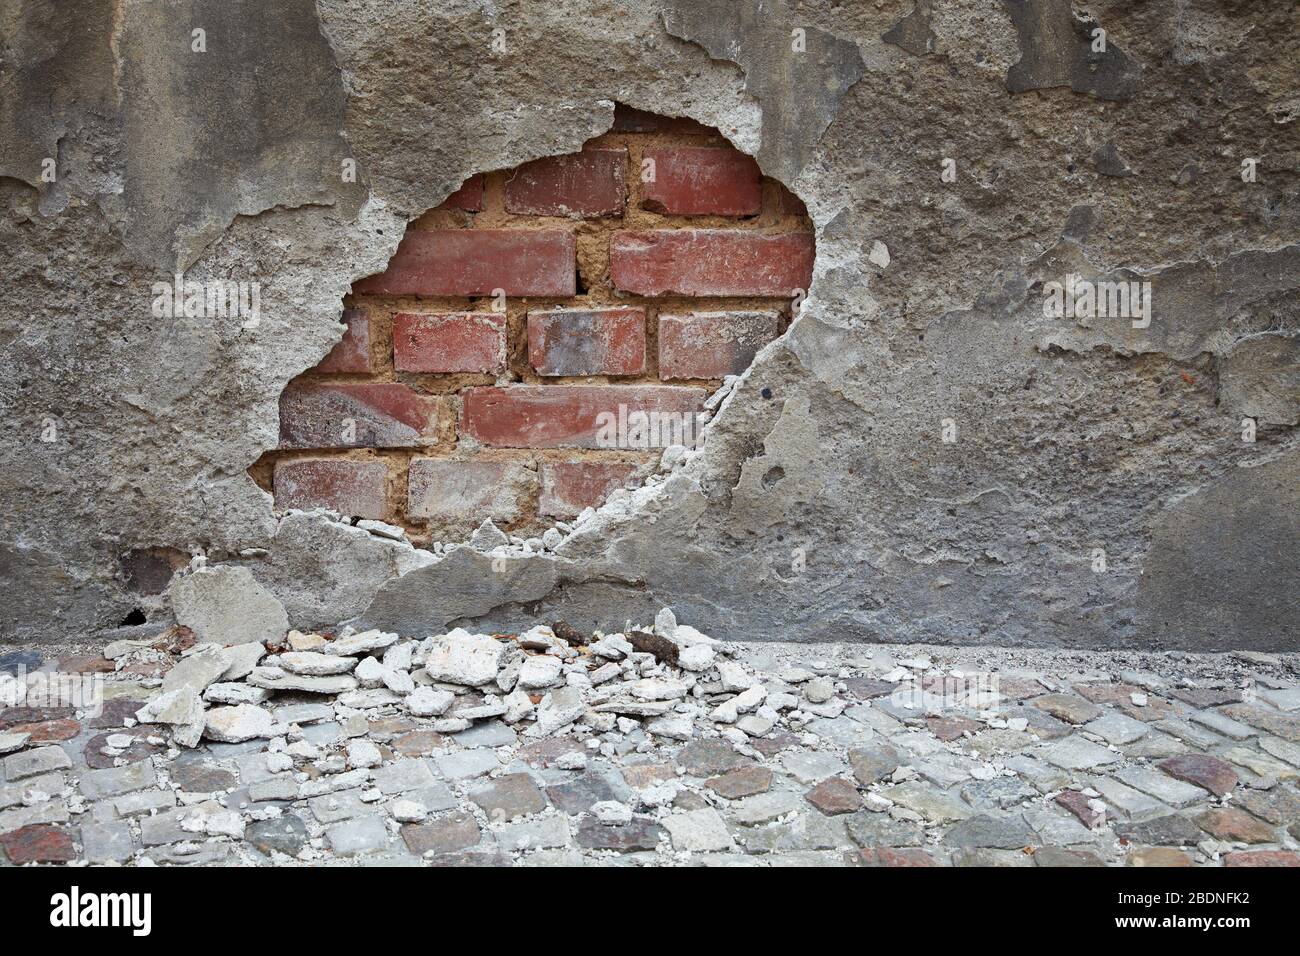 Brick Wall With Hole Images – Browse 202,048 Stock Photos, Vectors